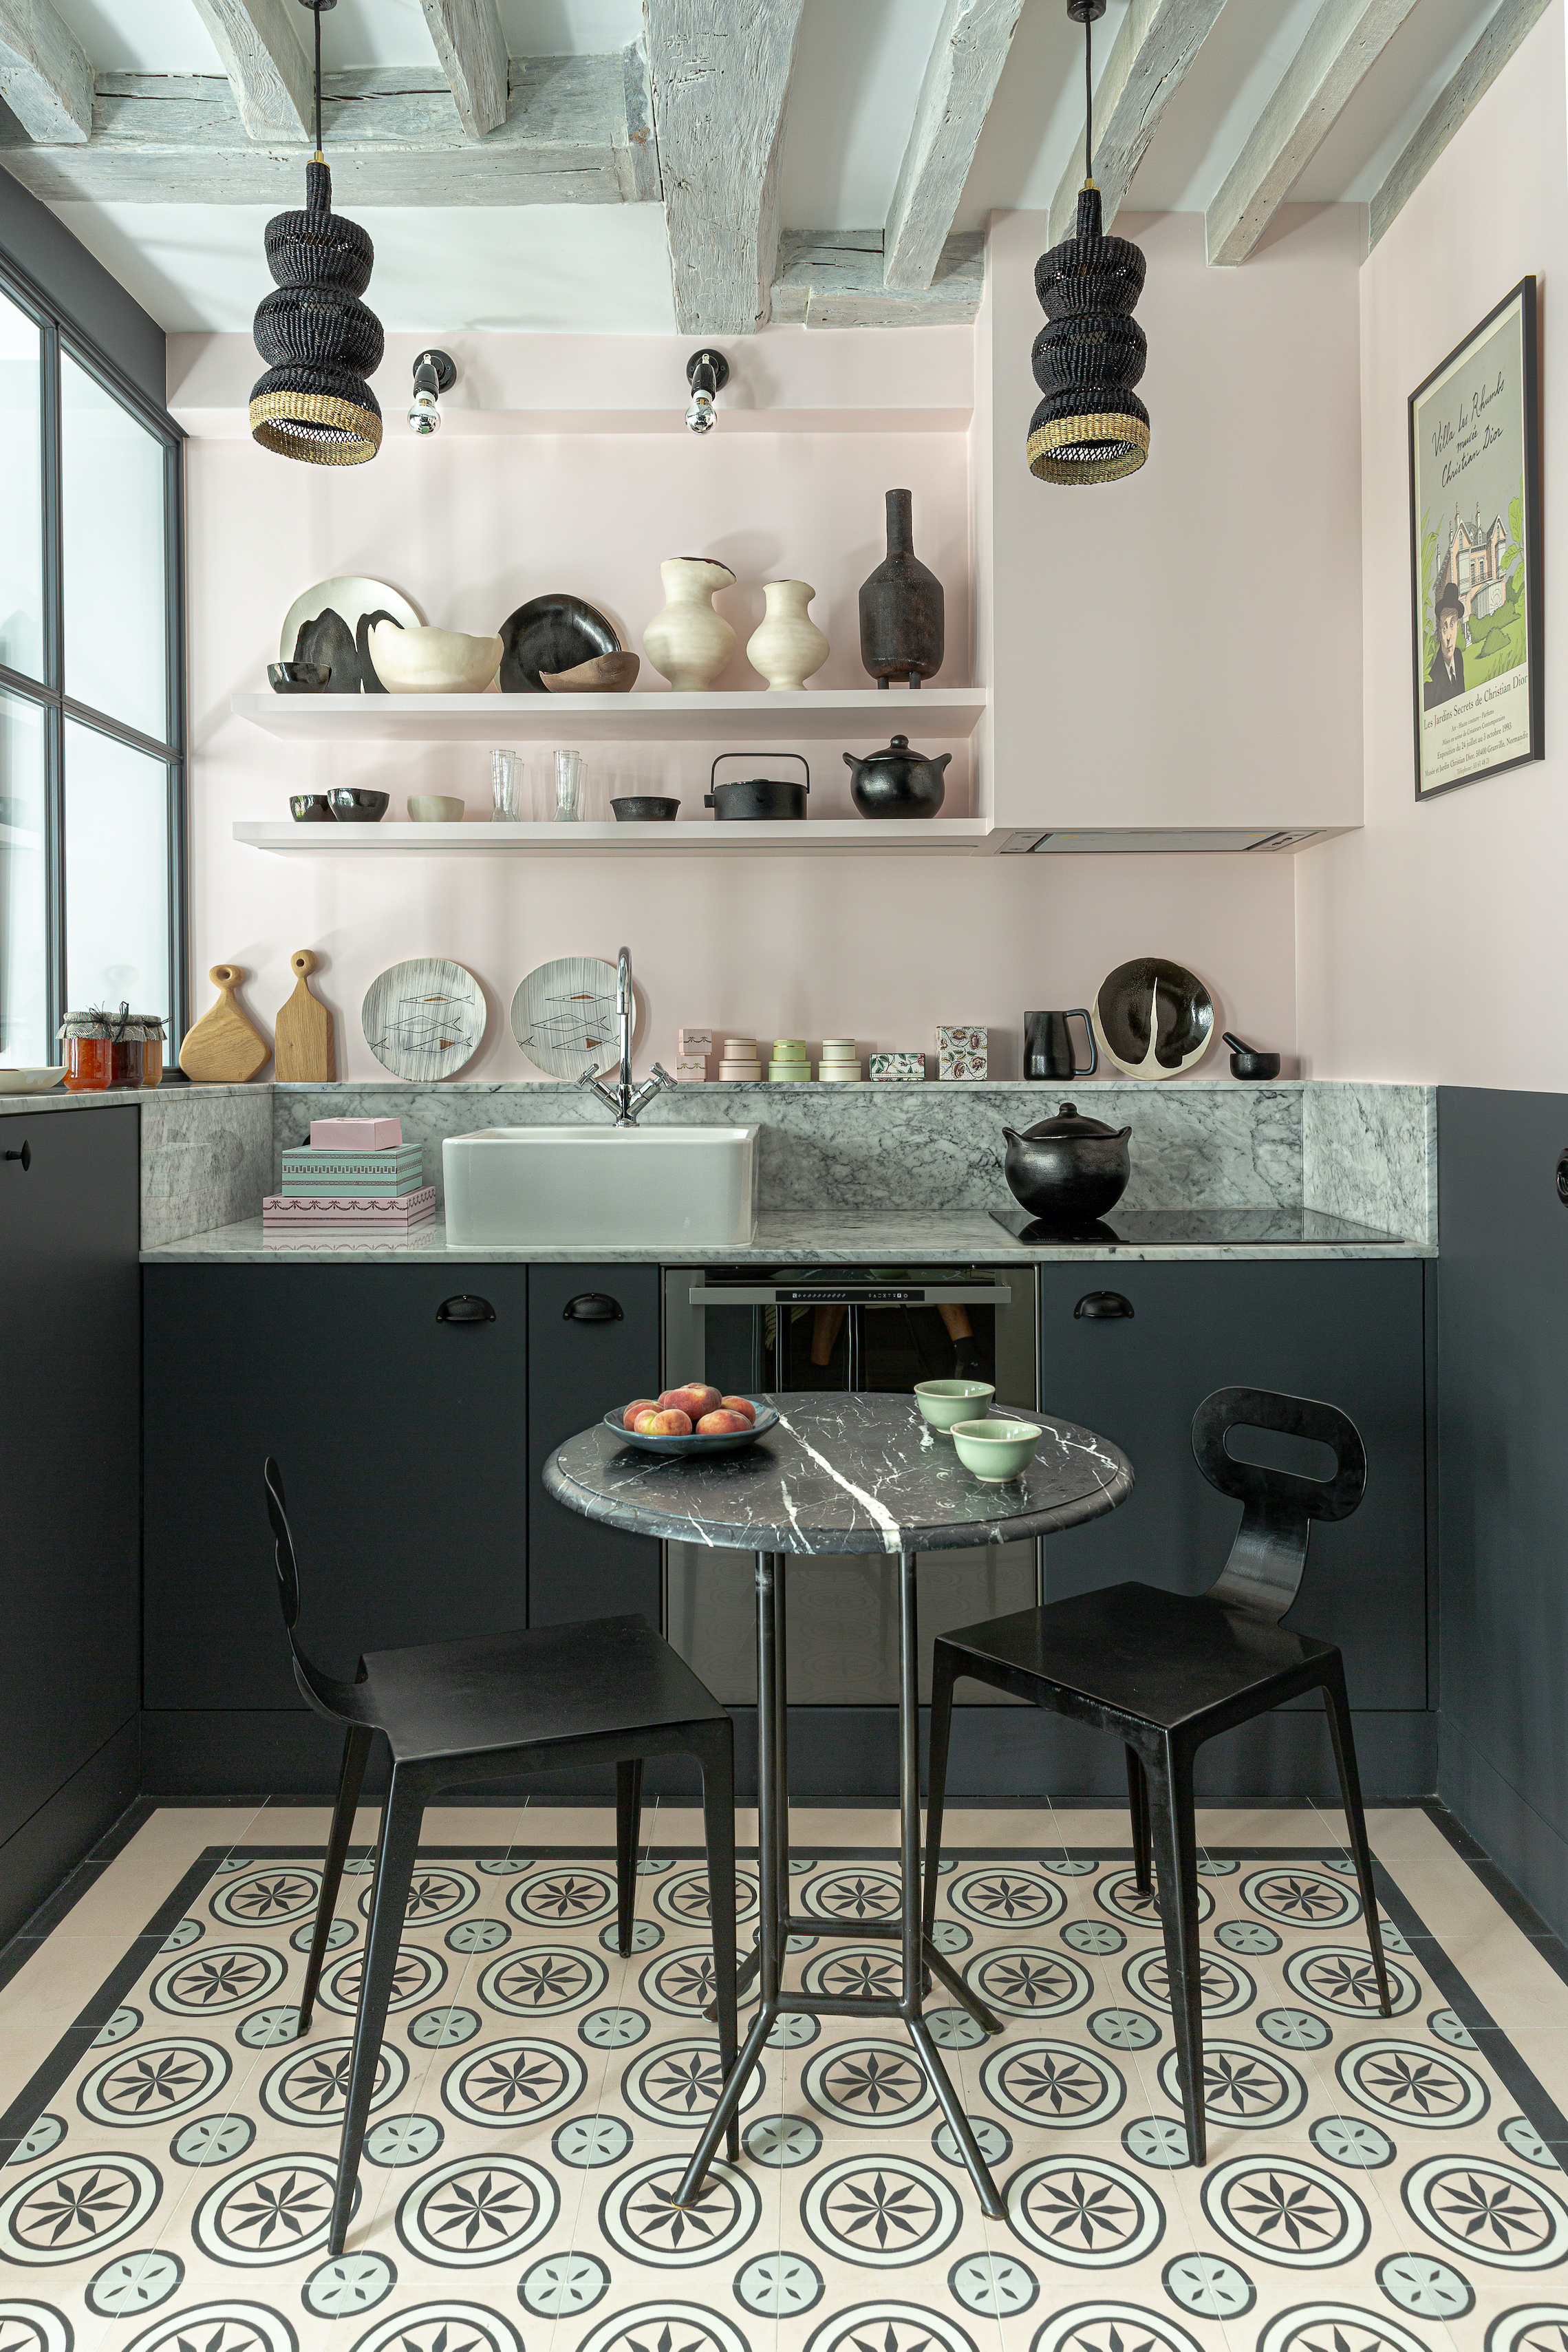 Semi-enclosed kitchen: Sabine's Paris apartment remodel by Marianne Evennou. Grégory Timsit photo.